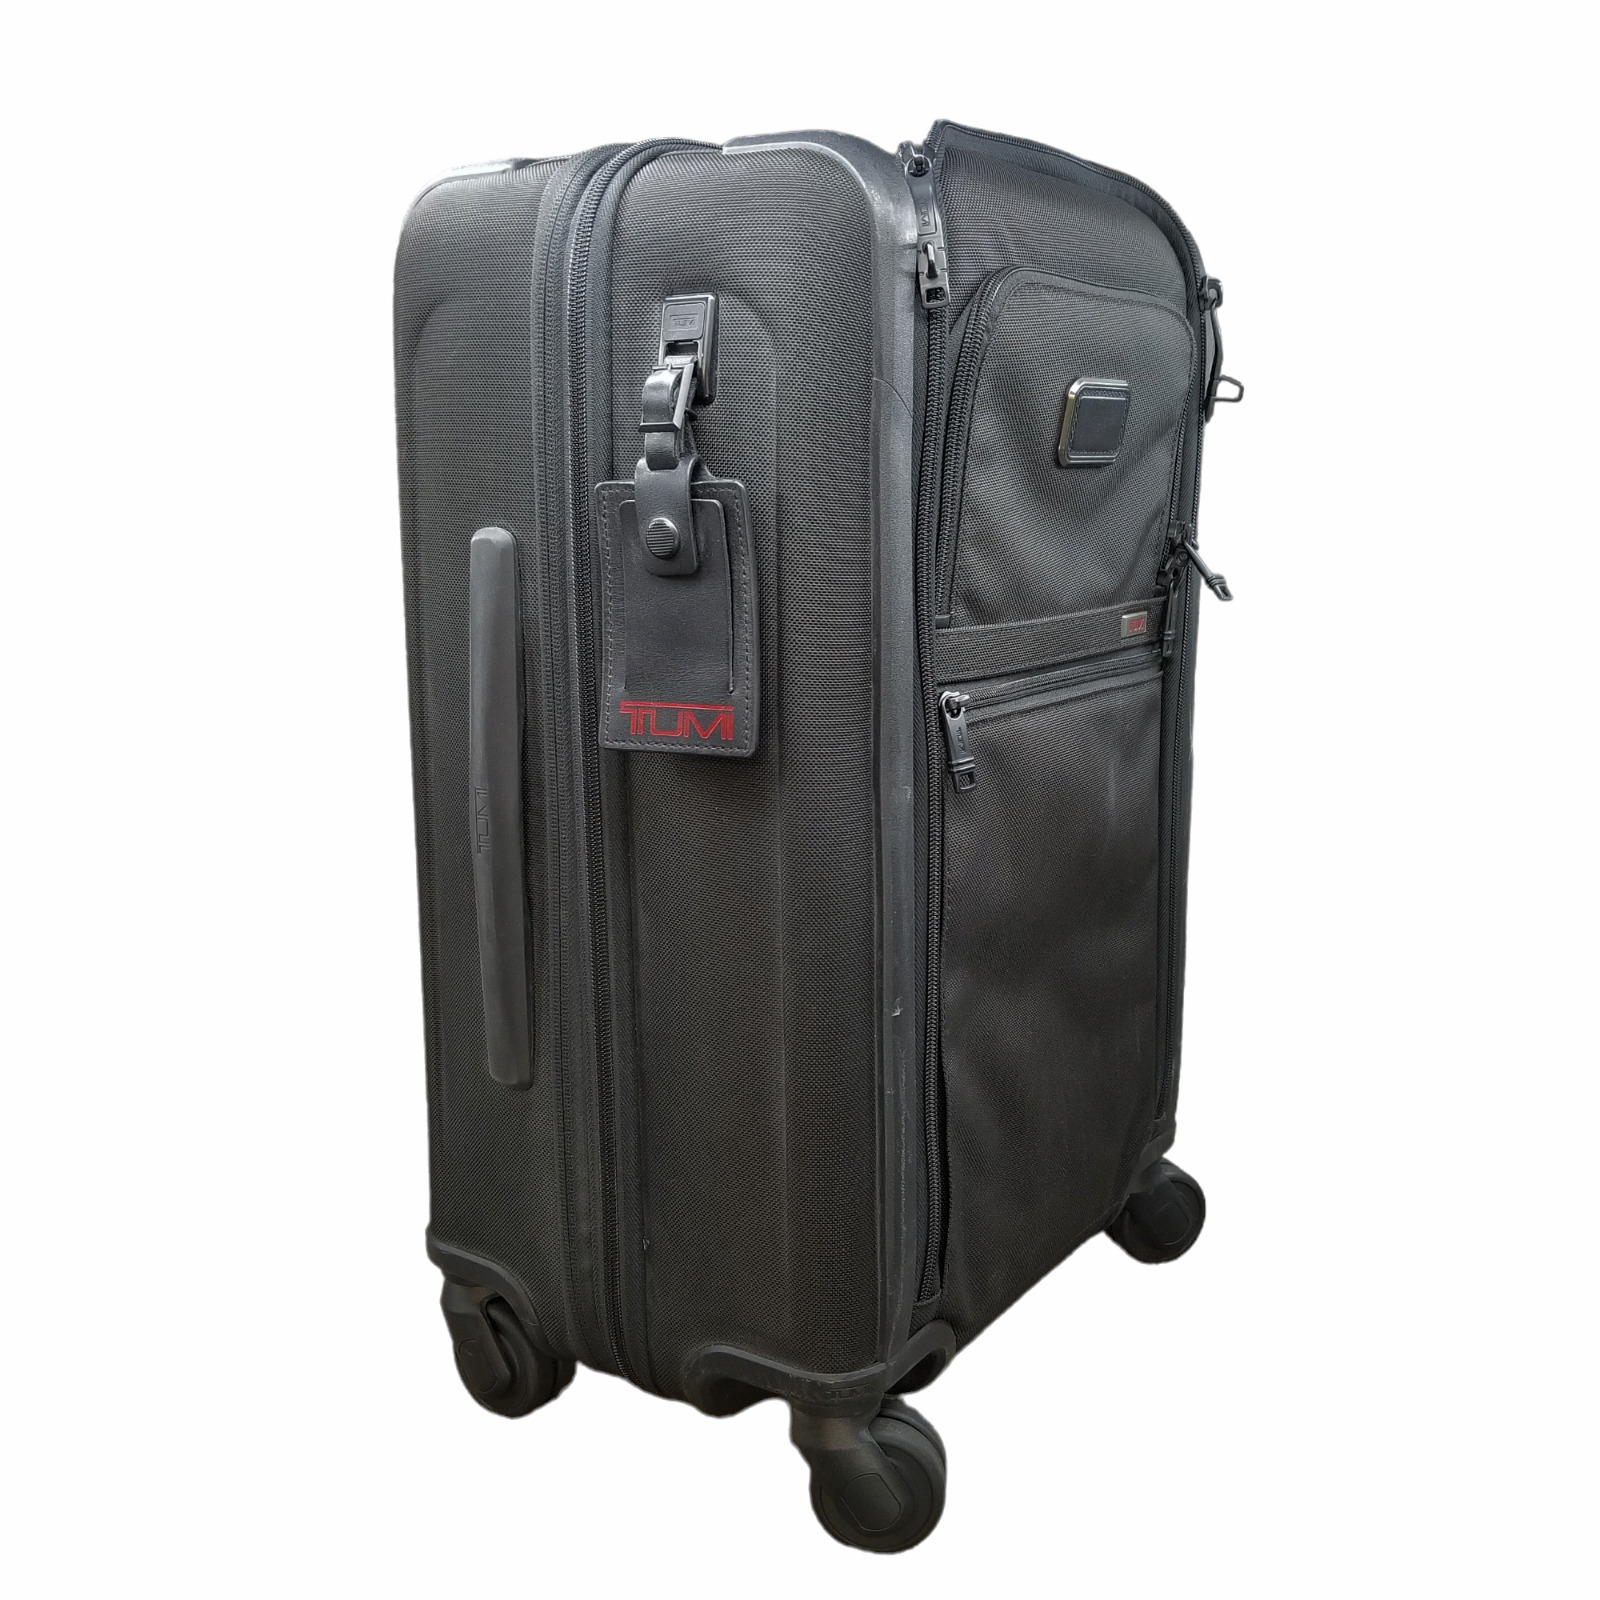 Tumi Alpha 3 Black Carry On Suitcase Expandable 4 Wheel Packing Case 1171661041